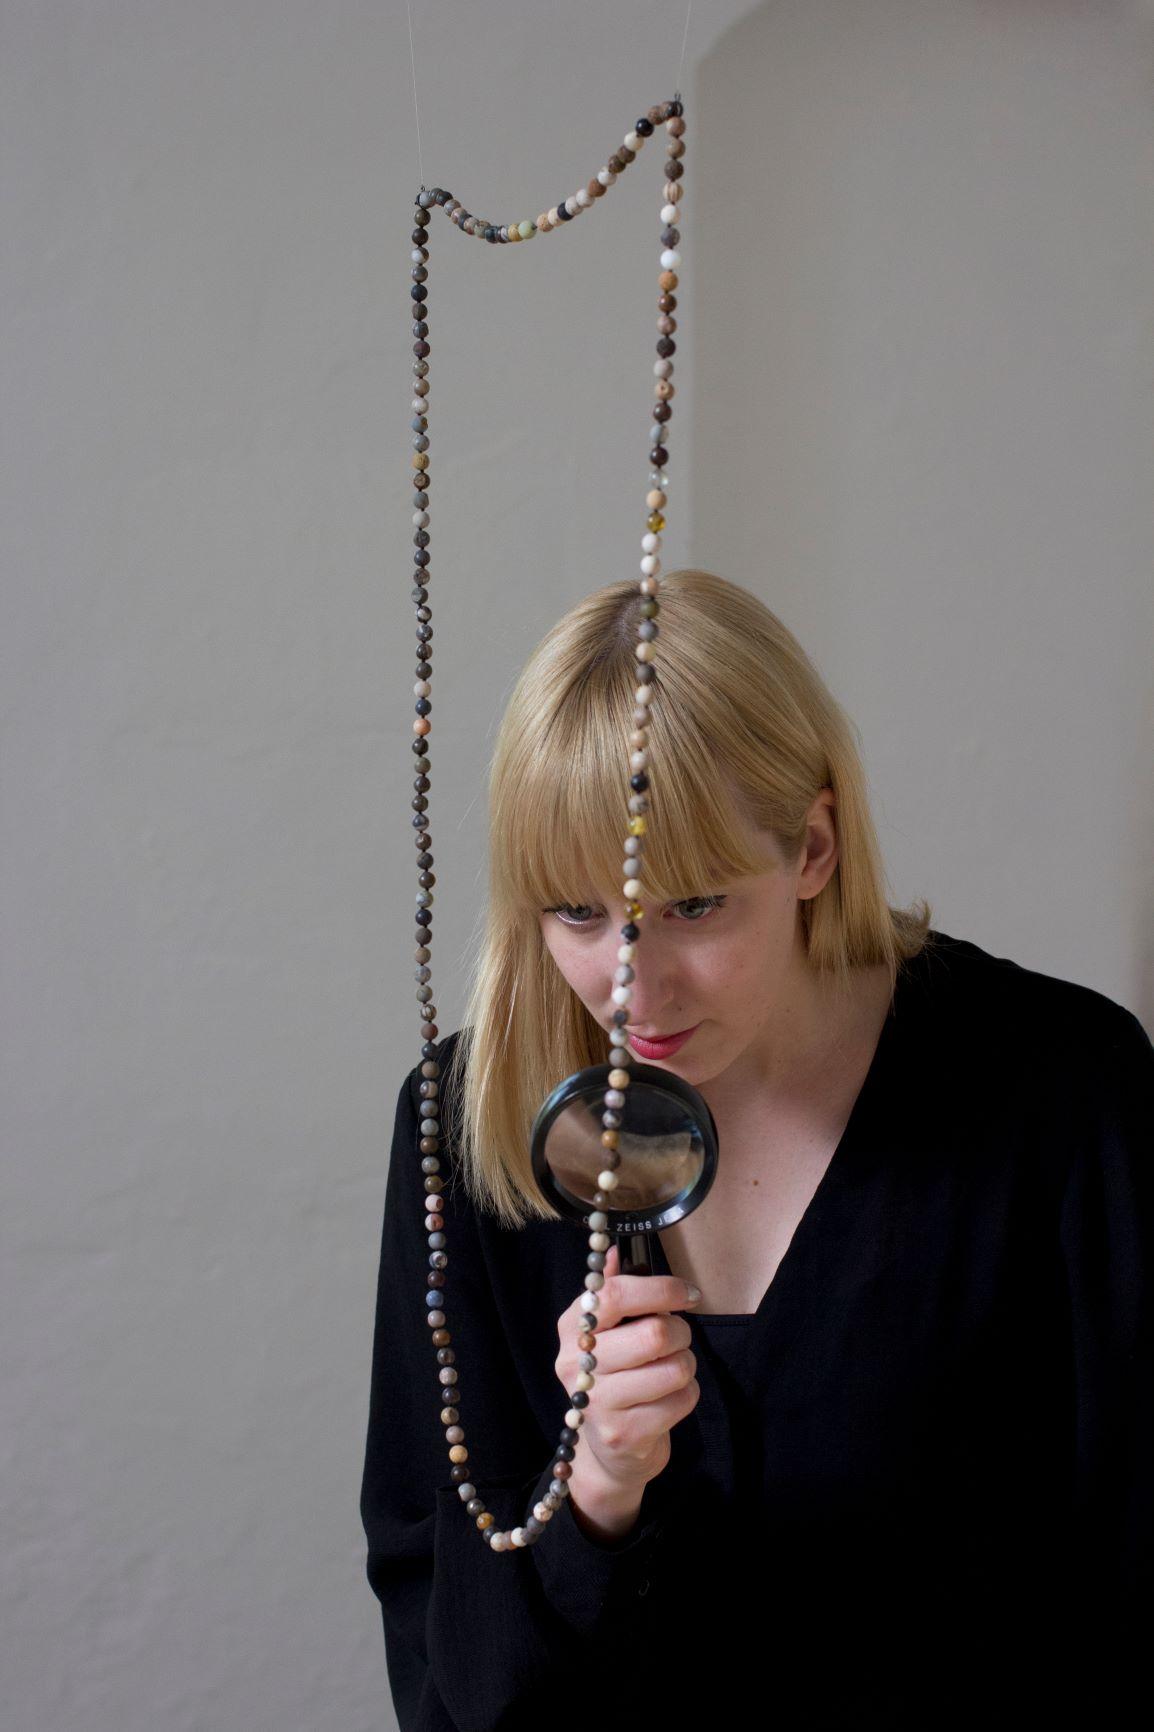 Artist Katie Paterson looks through a magnifying glass at her work Fossil Necklace, a necklace comprising 170 fossils carved into spherical beads